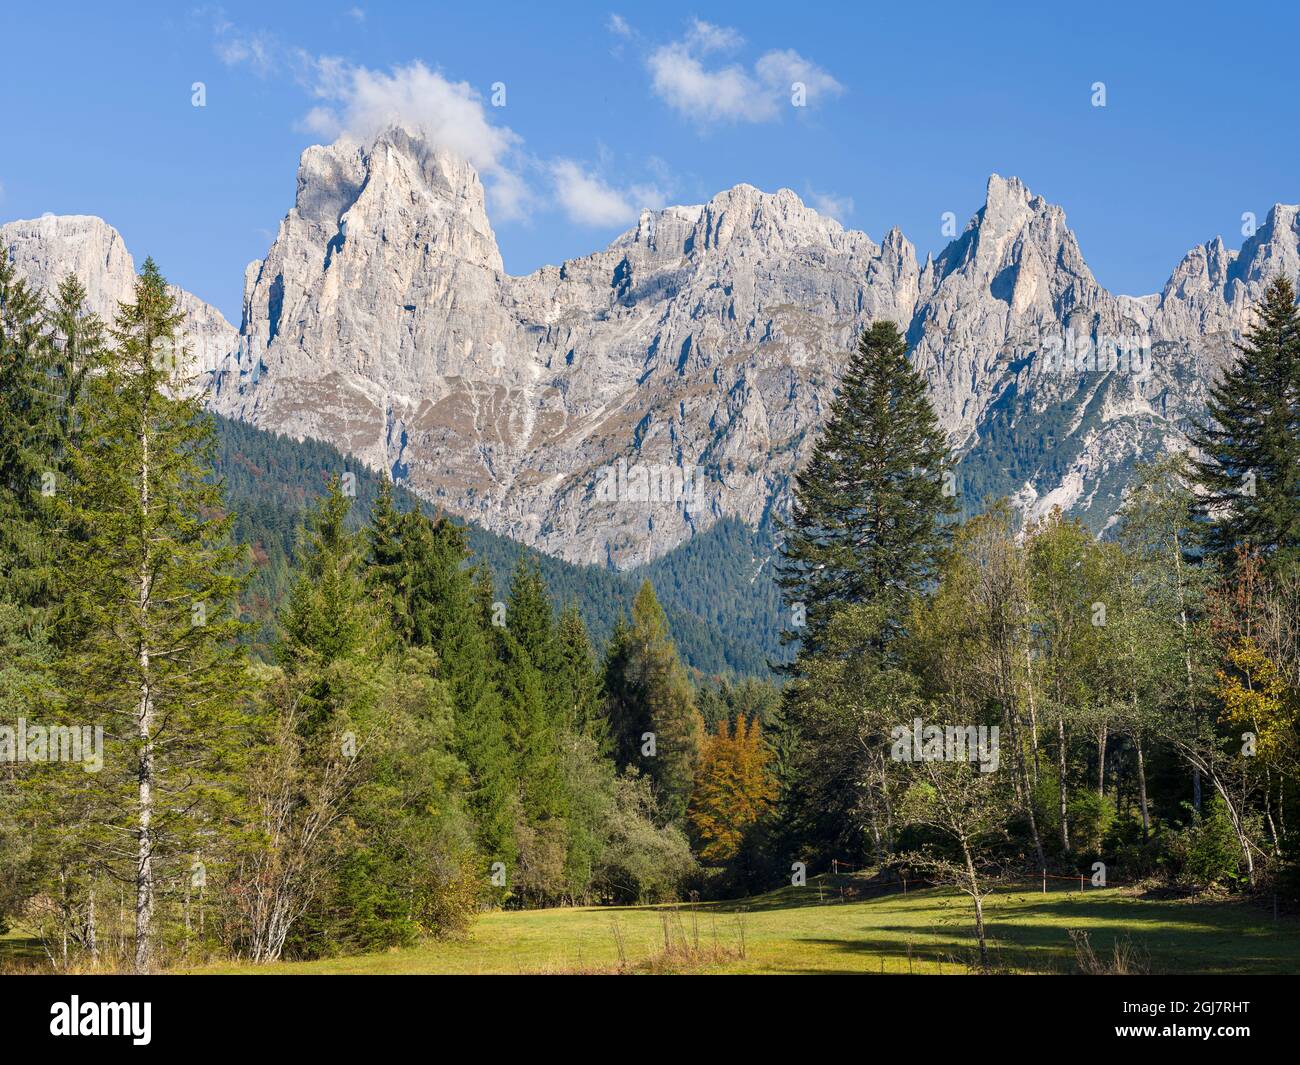 Valle del Canali in the mountain range Pale di San Martino, part of UNESCO World Heritage Site Dolomites, in the dolomites of the Primiero, Italy. Stock Photo